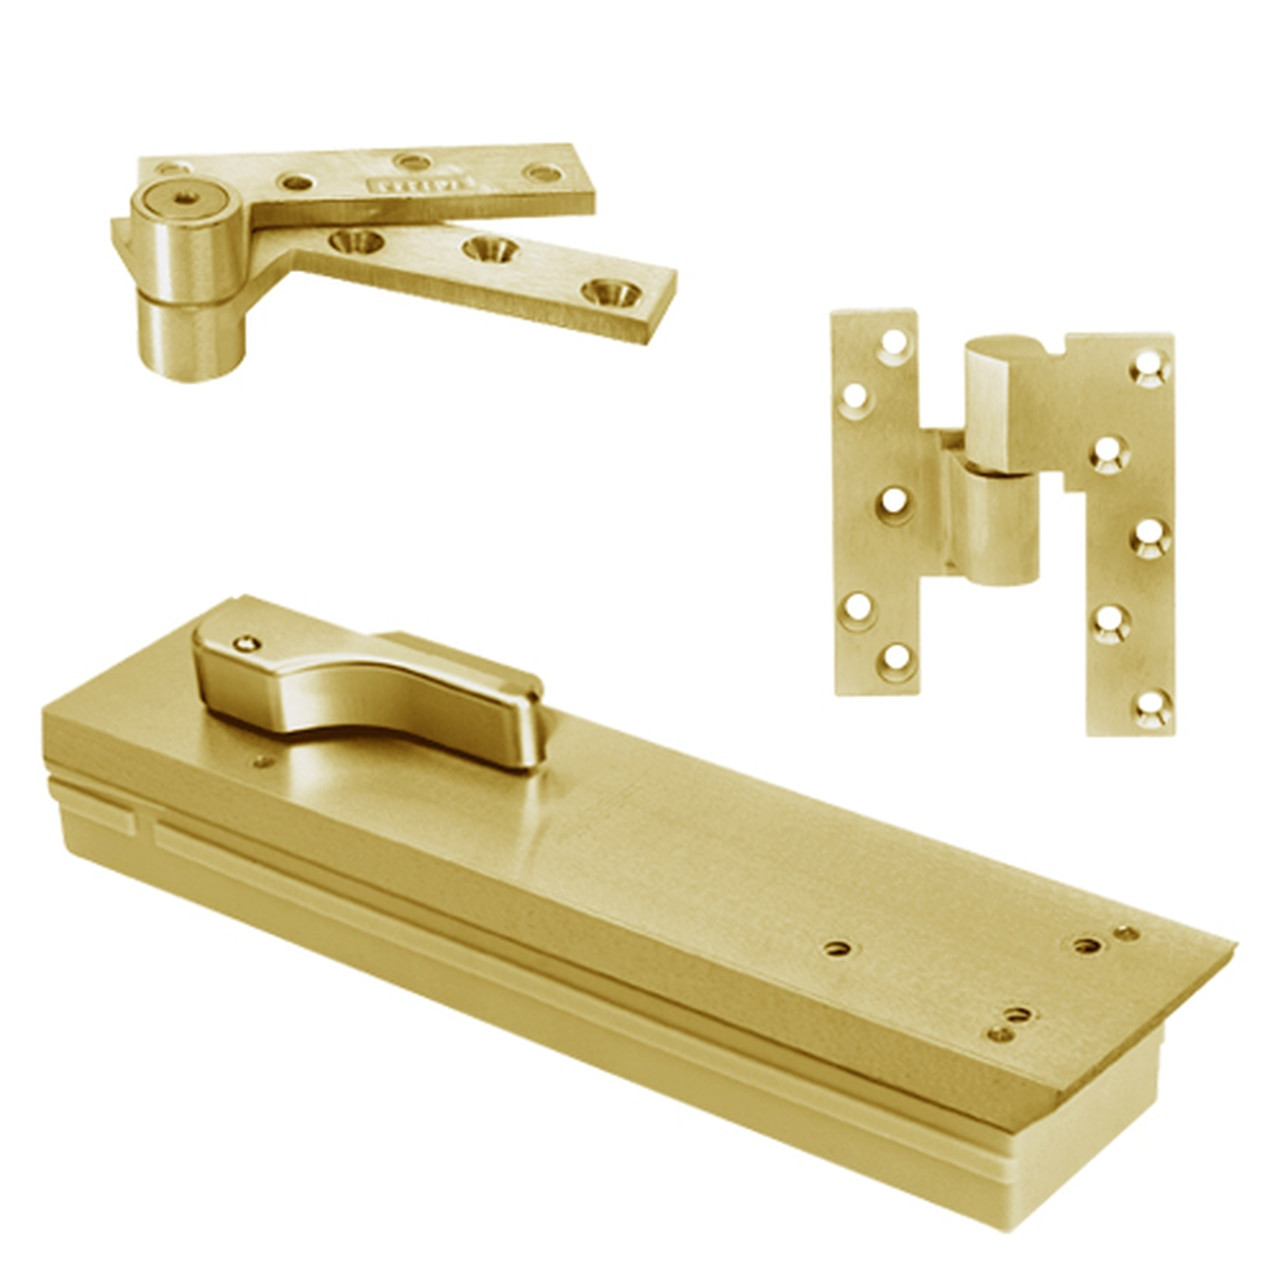 FQ5104NBC-LCC-RH-606 Rixson Q51 Series Fire Rated 3/4" Offset Hung Shallow Depth Floor Closers in Satin Brass Finish